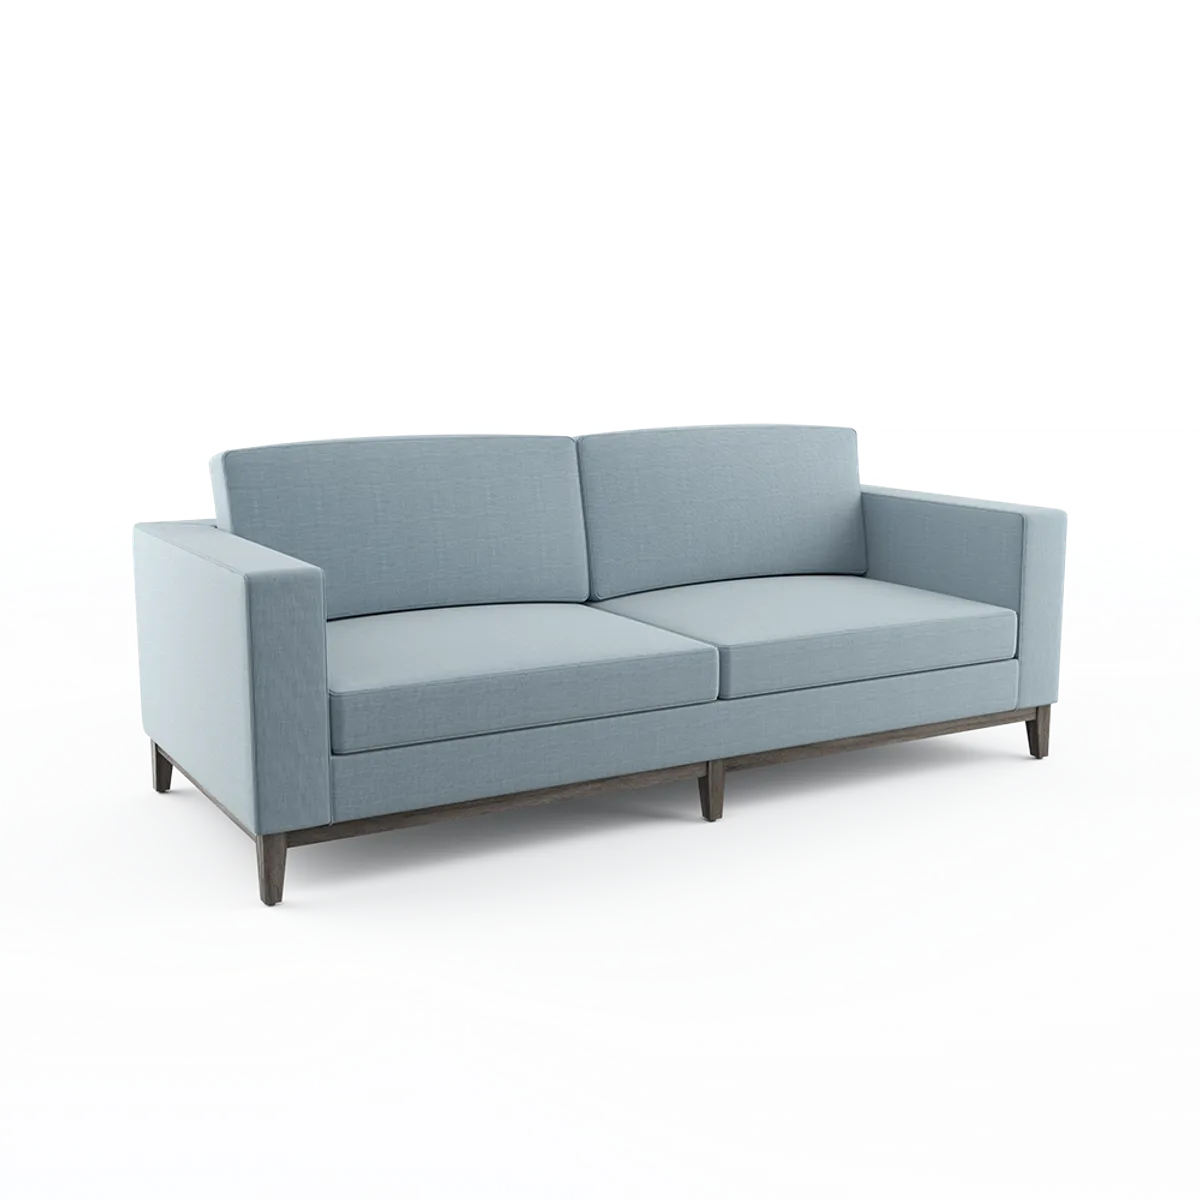 Quebec Sofa 3 Seater 1 By Inside Out Contracts